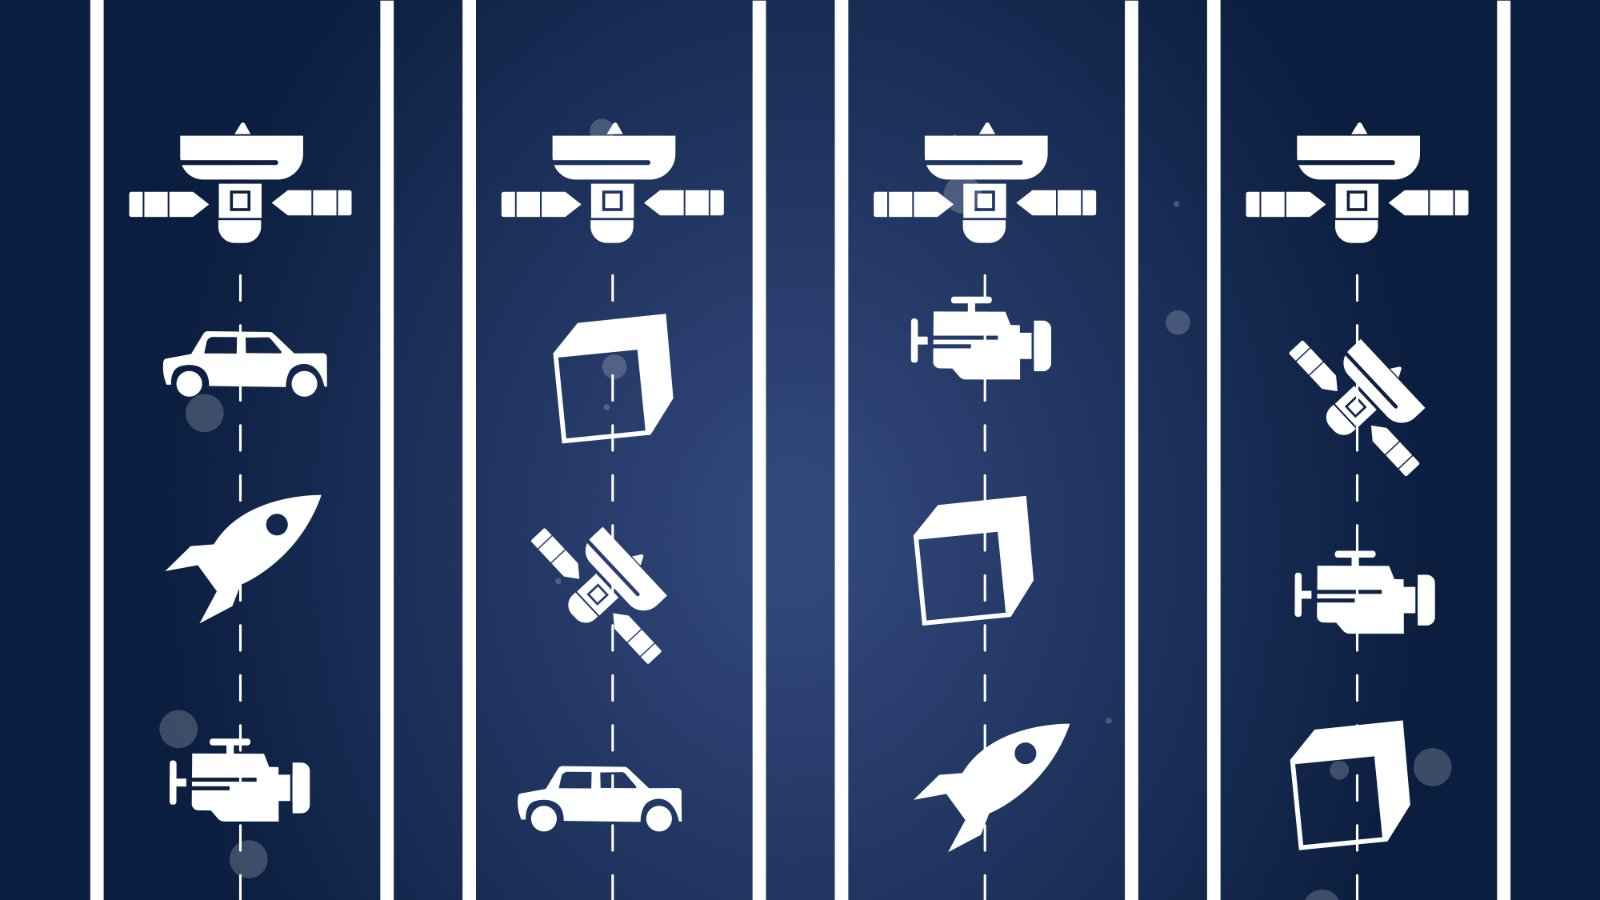 Devices whose operation depends on satellites